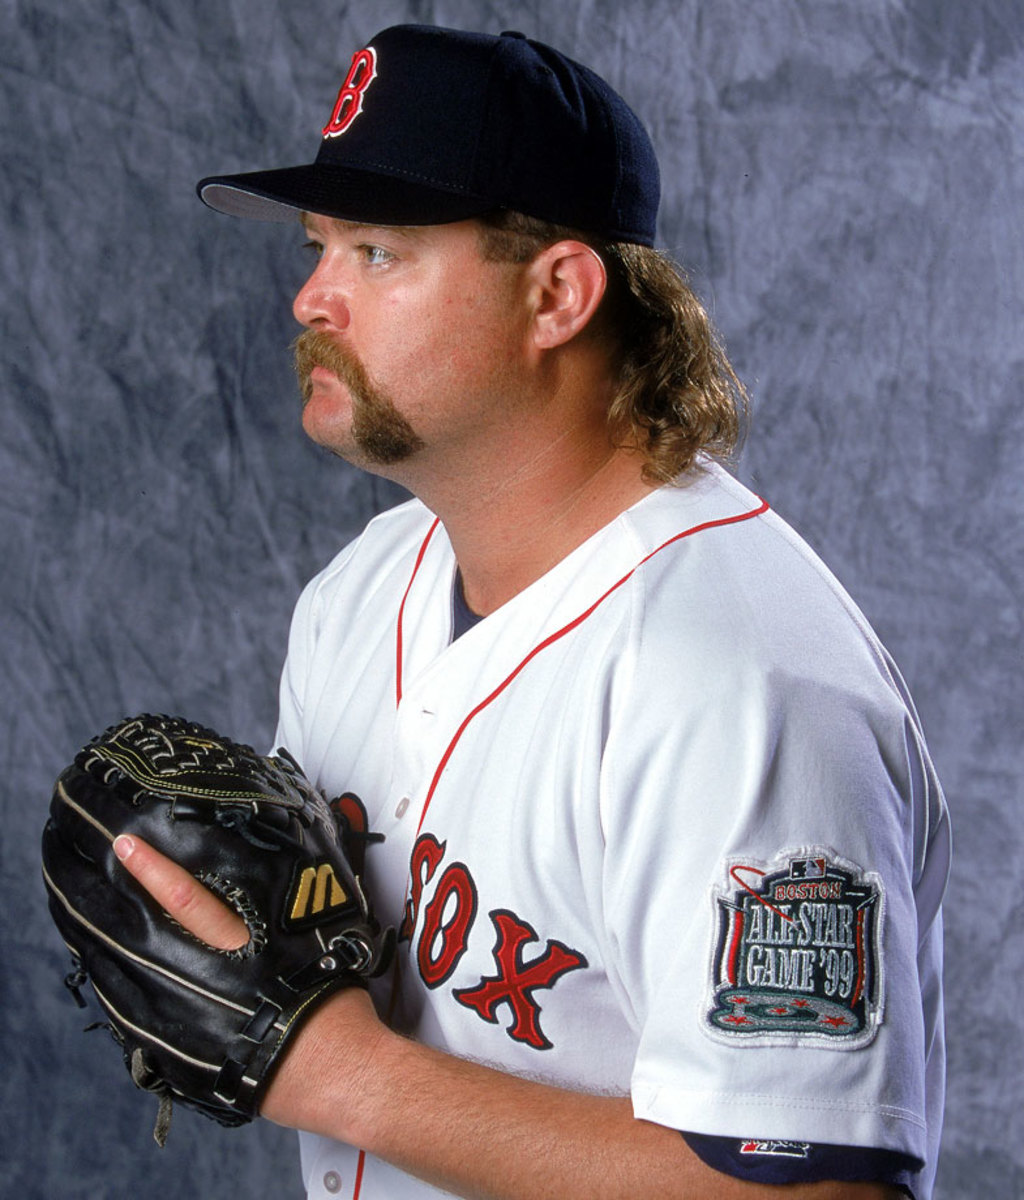 The 25 Most Awesome Mullets in Sports History